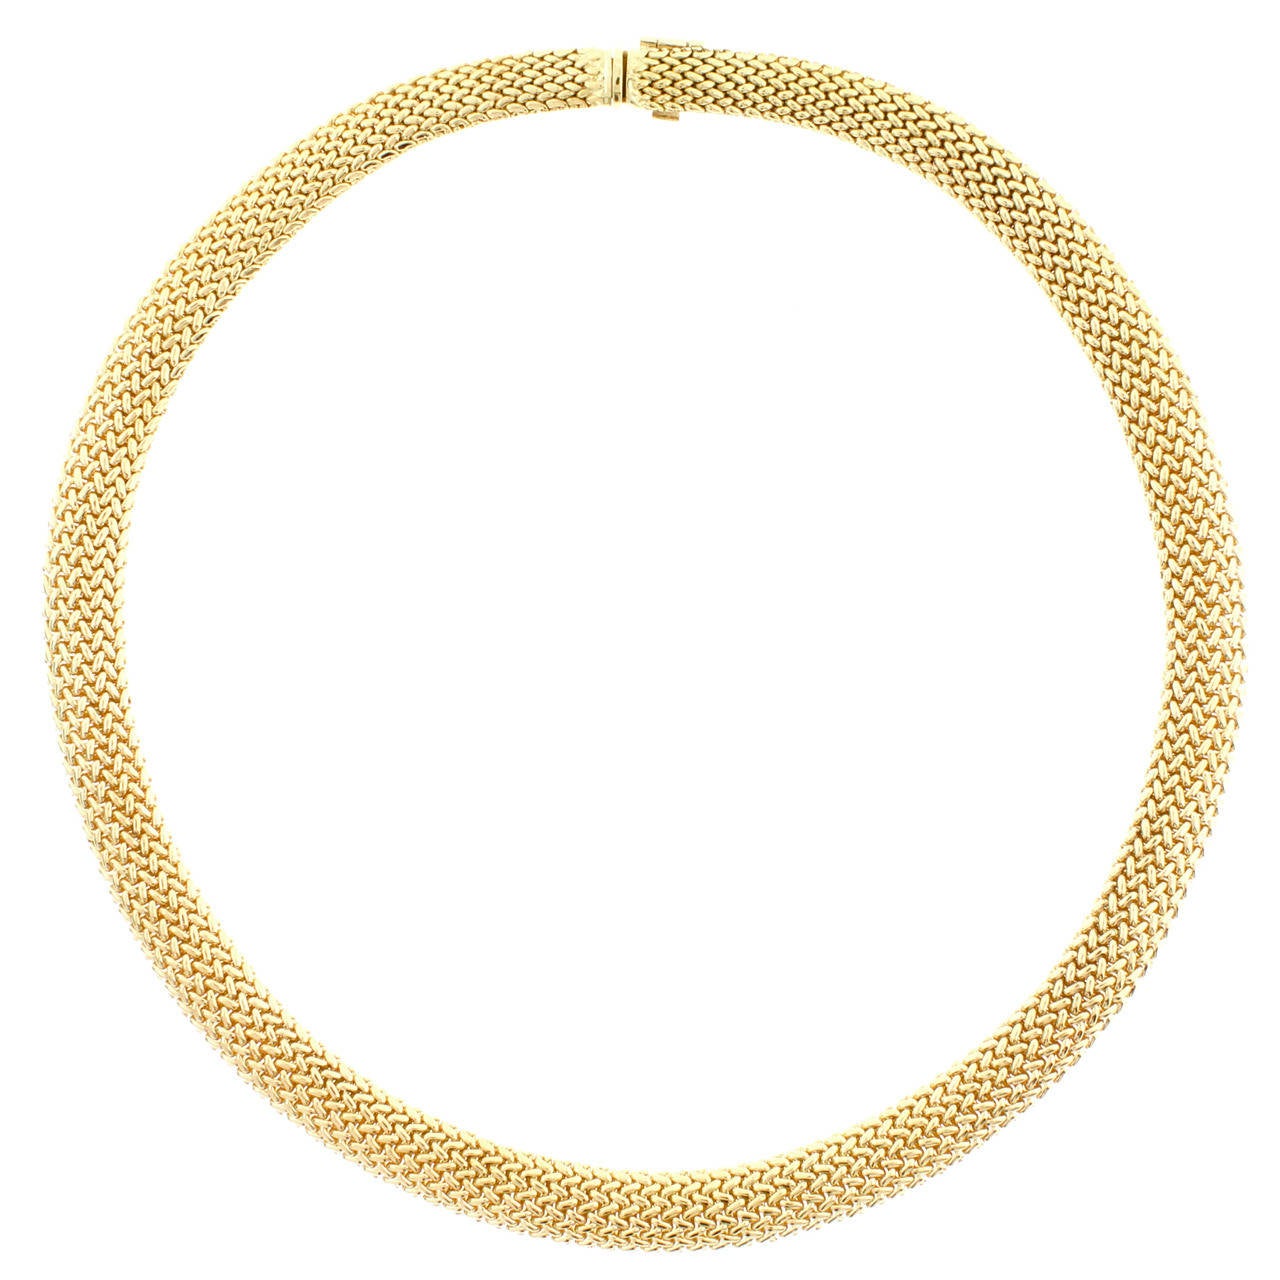 Tiffany & Co.Somerset Gold Mesh Necklace